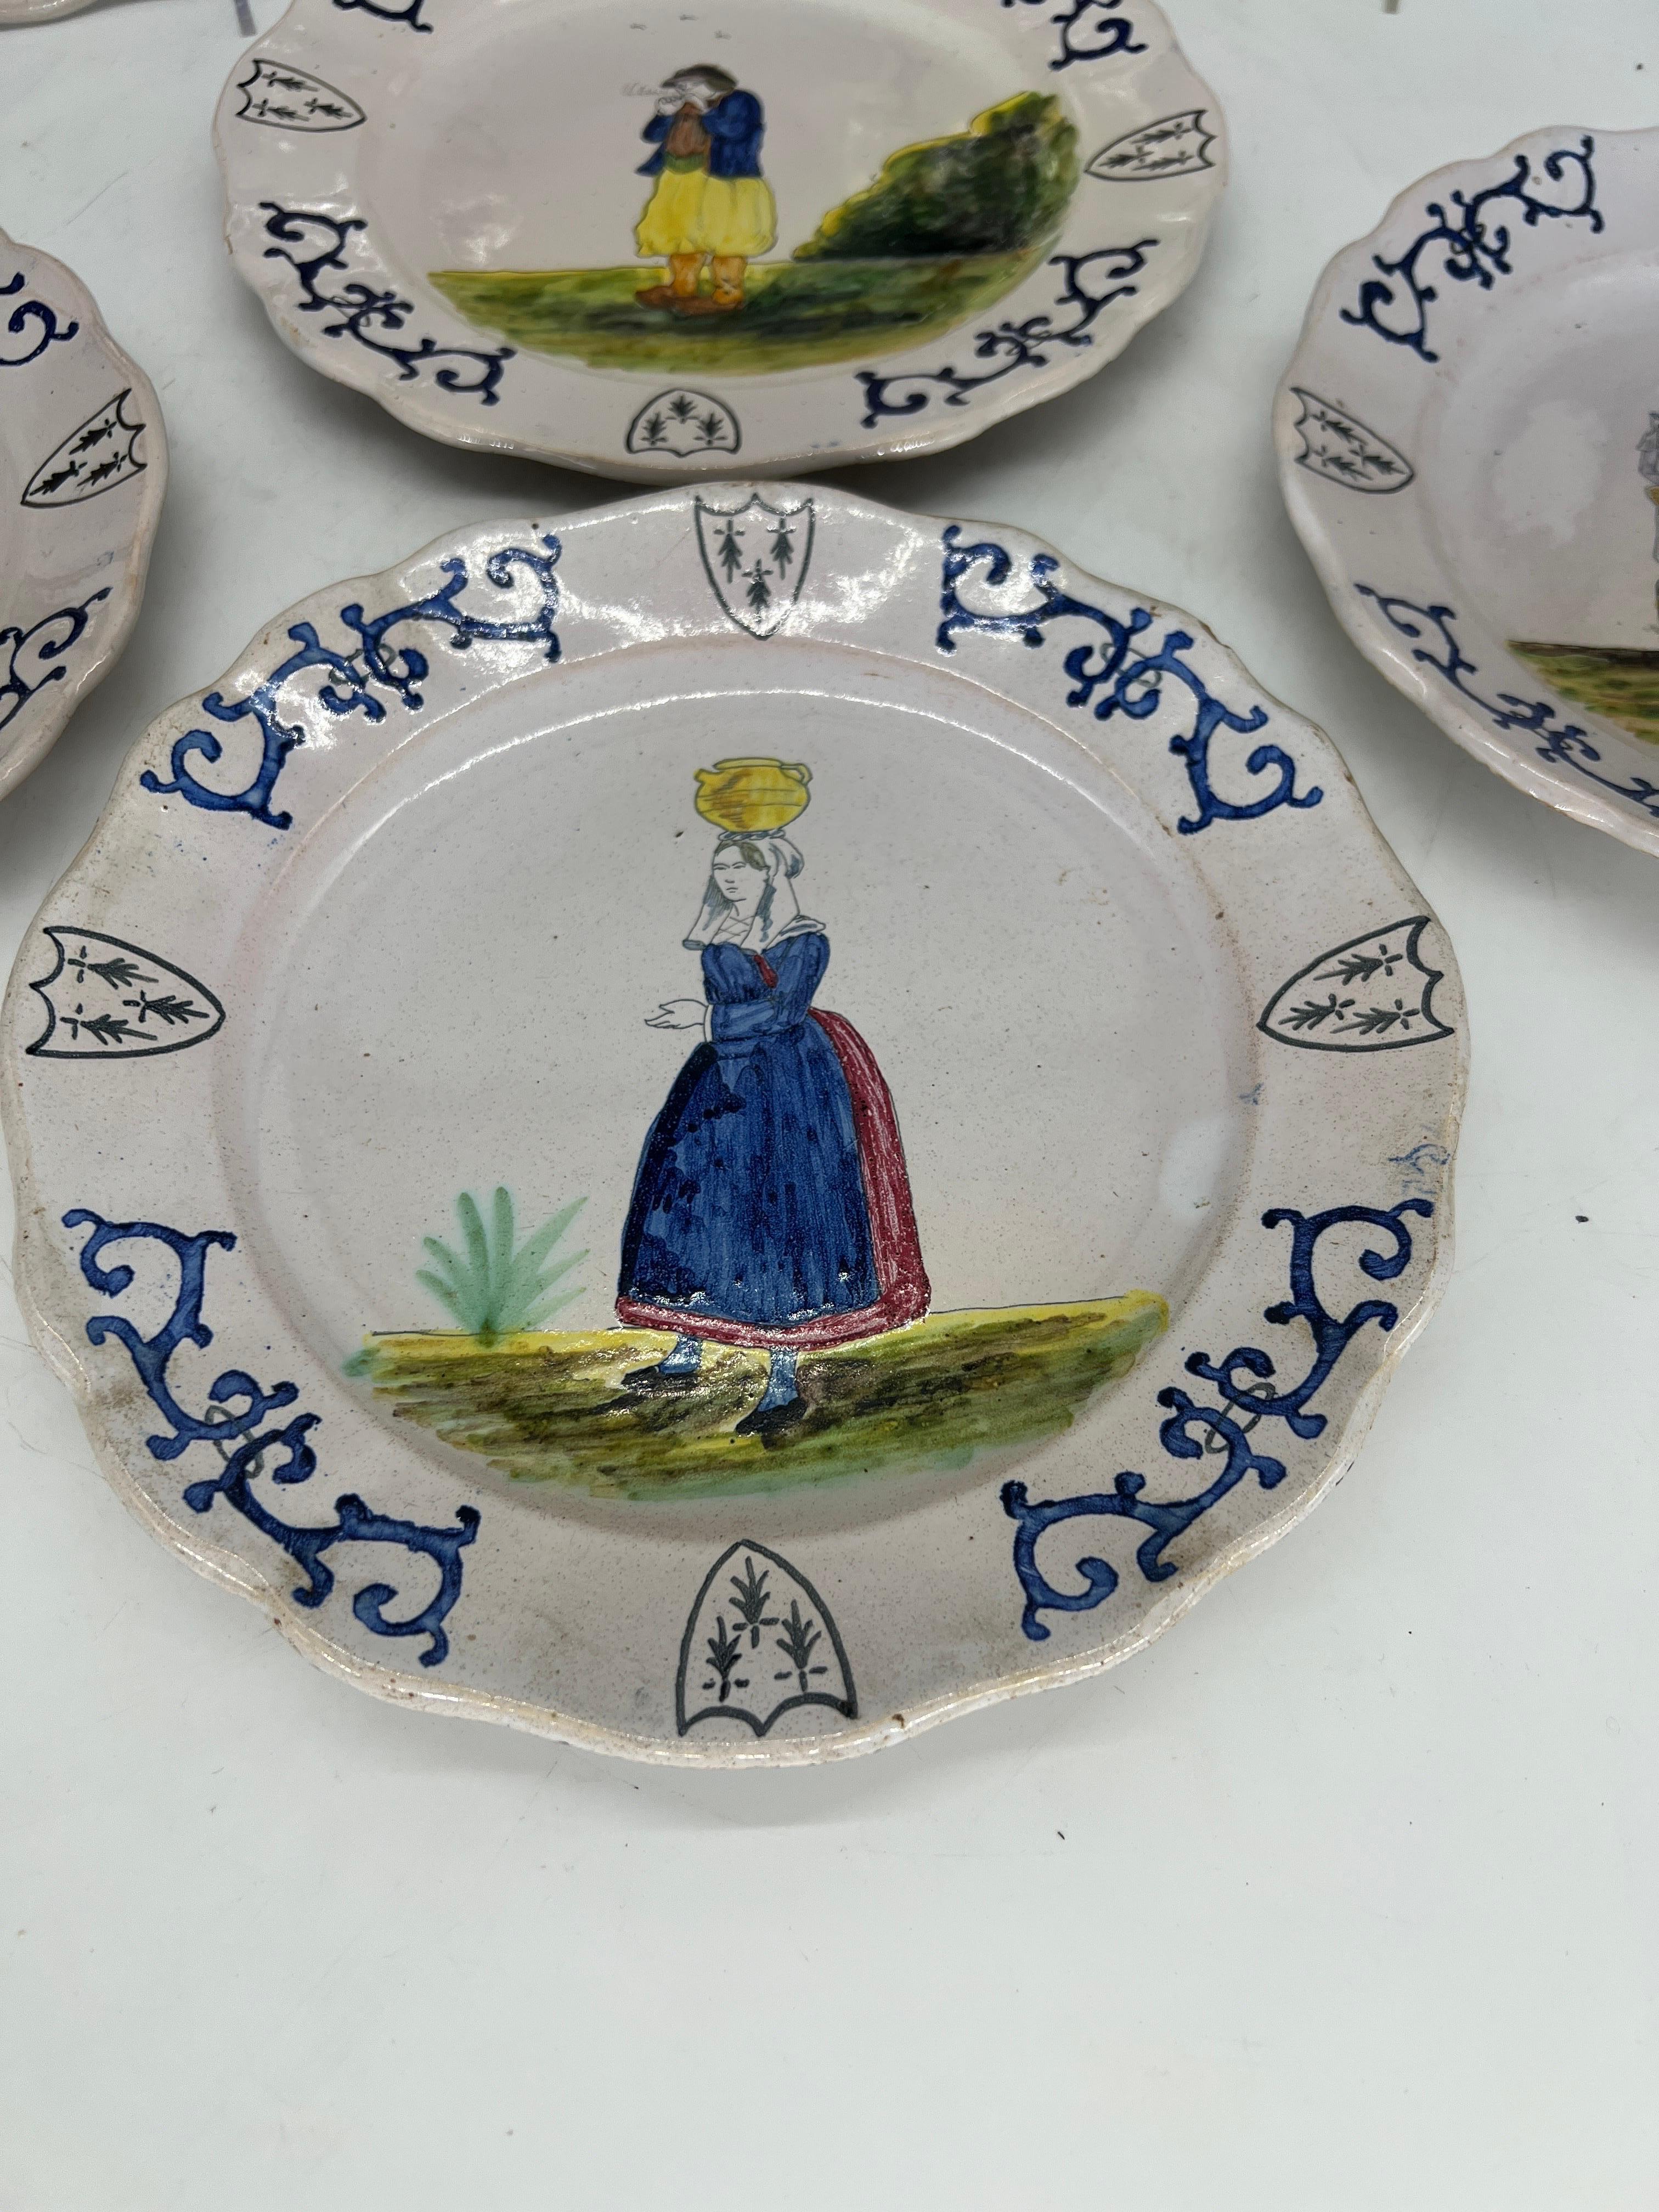 Quimper Pottery, French 20th century.

A collection of six vintage Quimper faience pottery plates. Each plate has a hand painted and tin glazed figural surface and accented by a polychrome vine border, armorial shields and a scalloped edge. Marked